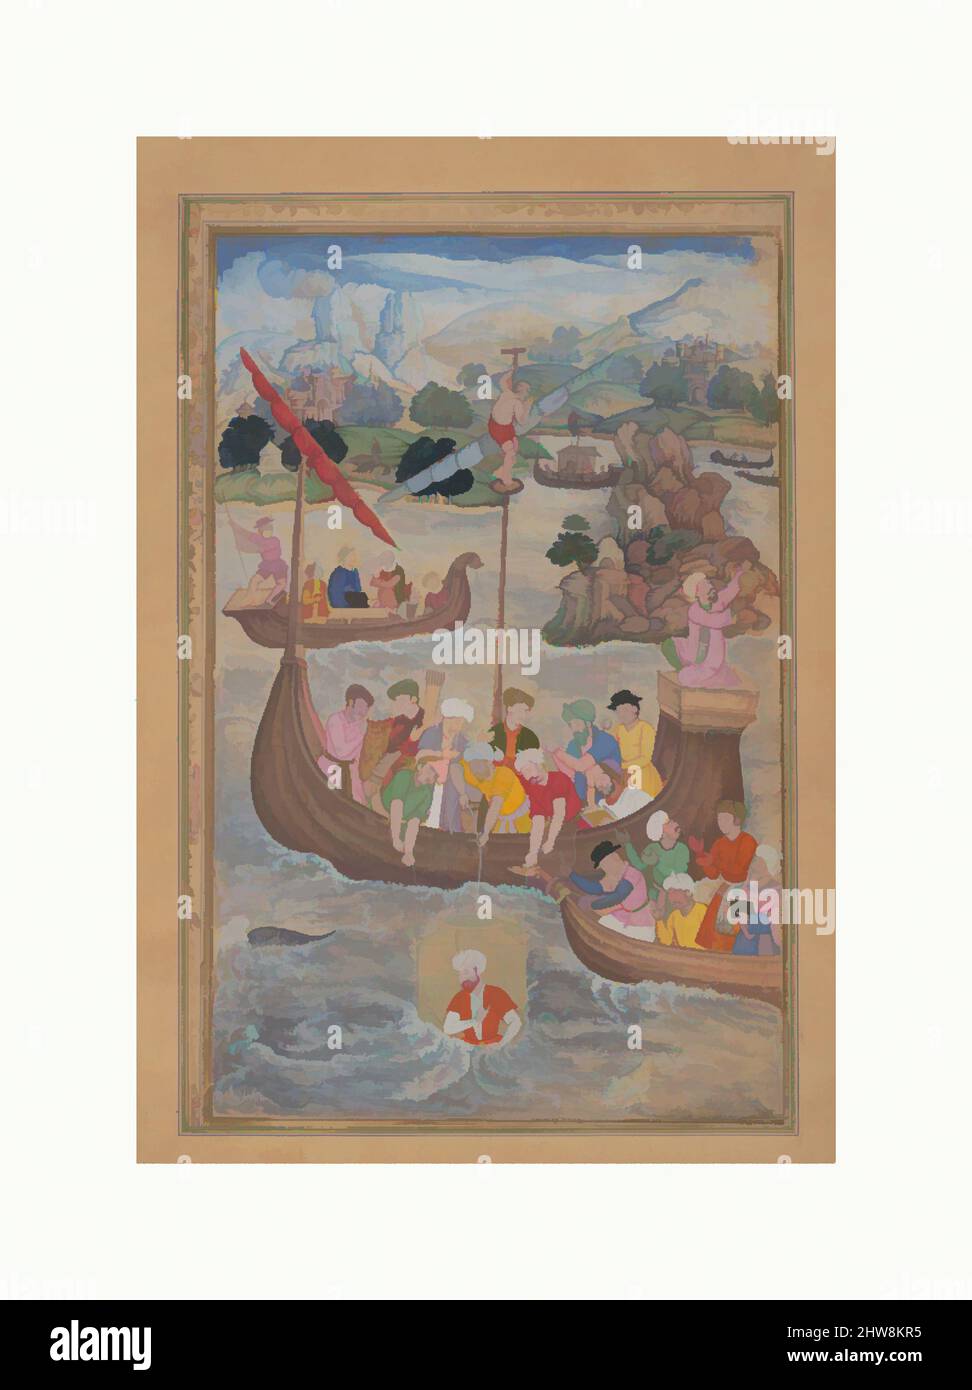 Art inspired by Alexander is Lowered into the Sea', Folio from a Khamsa (Quintet) of Amir Khusrau Dihlavi, 1597–98, Attributed to India, Main support: Ink, watercolor, gold on paper, 9 3/8 x 6 1/4in. (23.8 x 15.9cm), Codices, Painting attributed to Mukunda, The Khamsa of the Indian, Classic works modernized by Artotop with a splash of modernity. Shapes, color and value, eye-catching visual impact on art. Emotions through freedom of artworks in a contemporary way. A timeless message pursuing a wildly creative new direction. Artists turning to the digital medium and creating the Artotop NFT Stock Photo